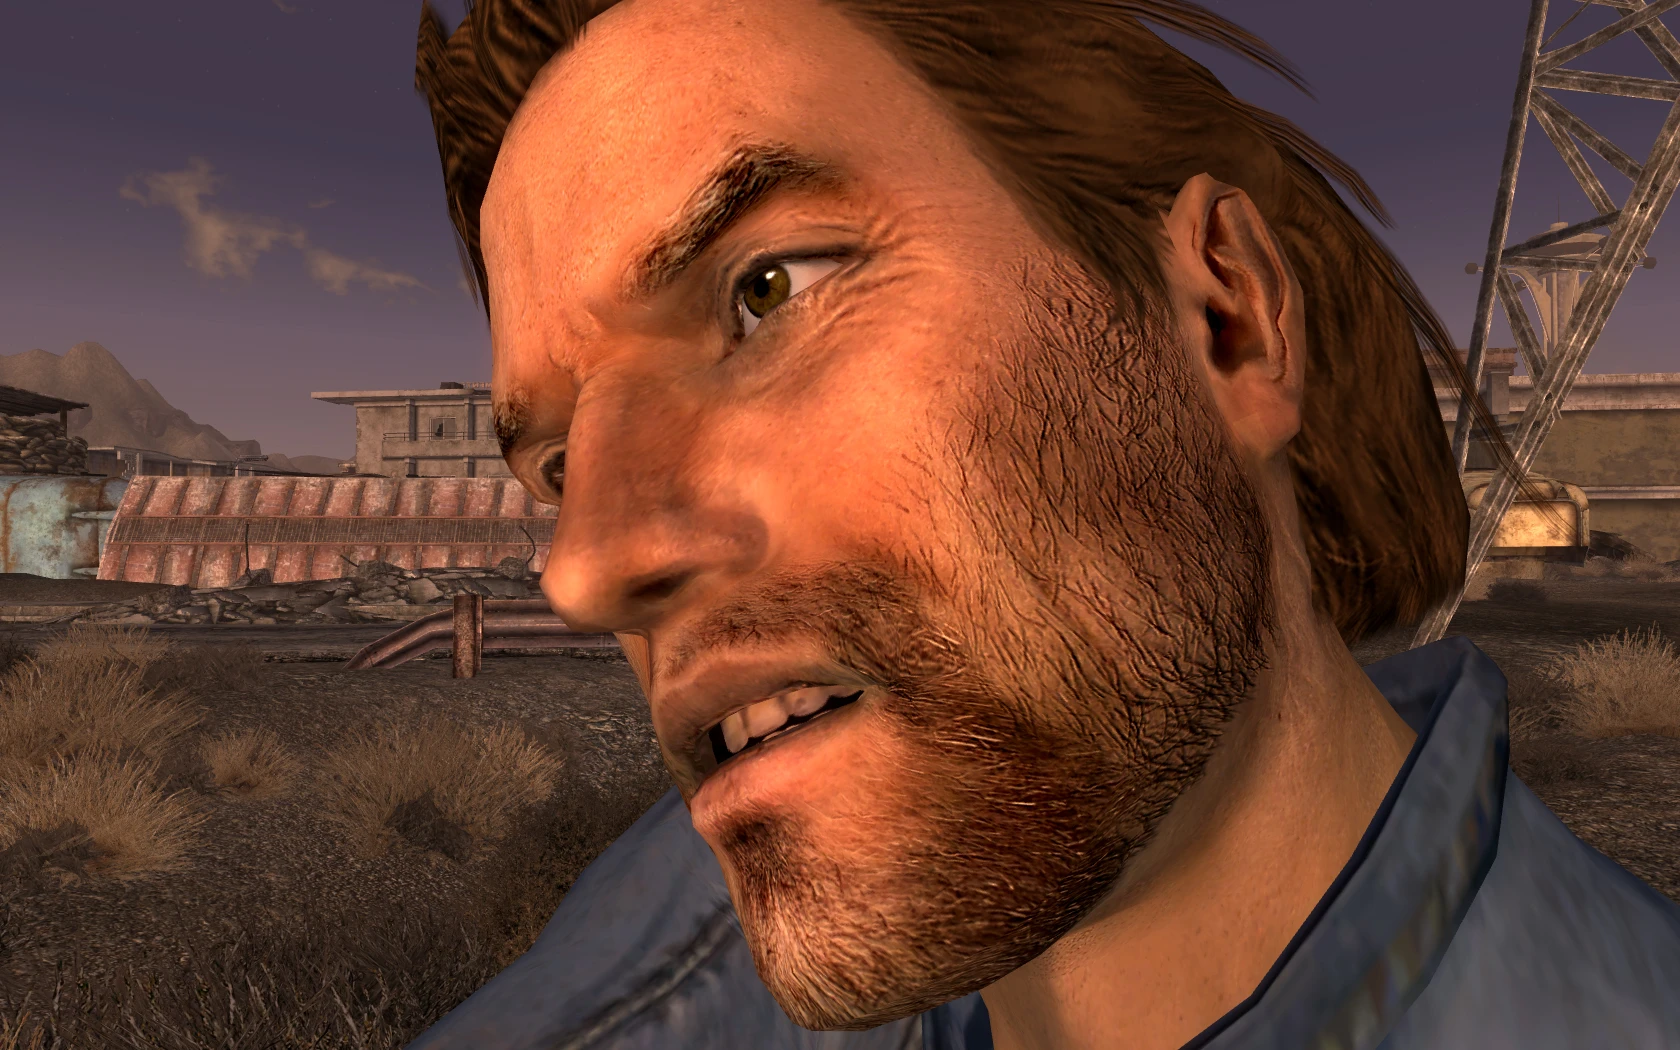 fallout new vegas character overhaul colored face